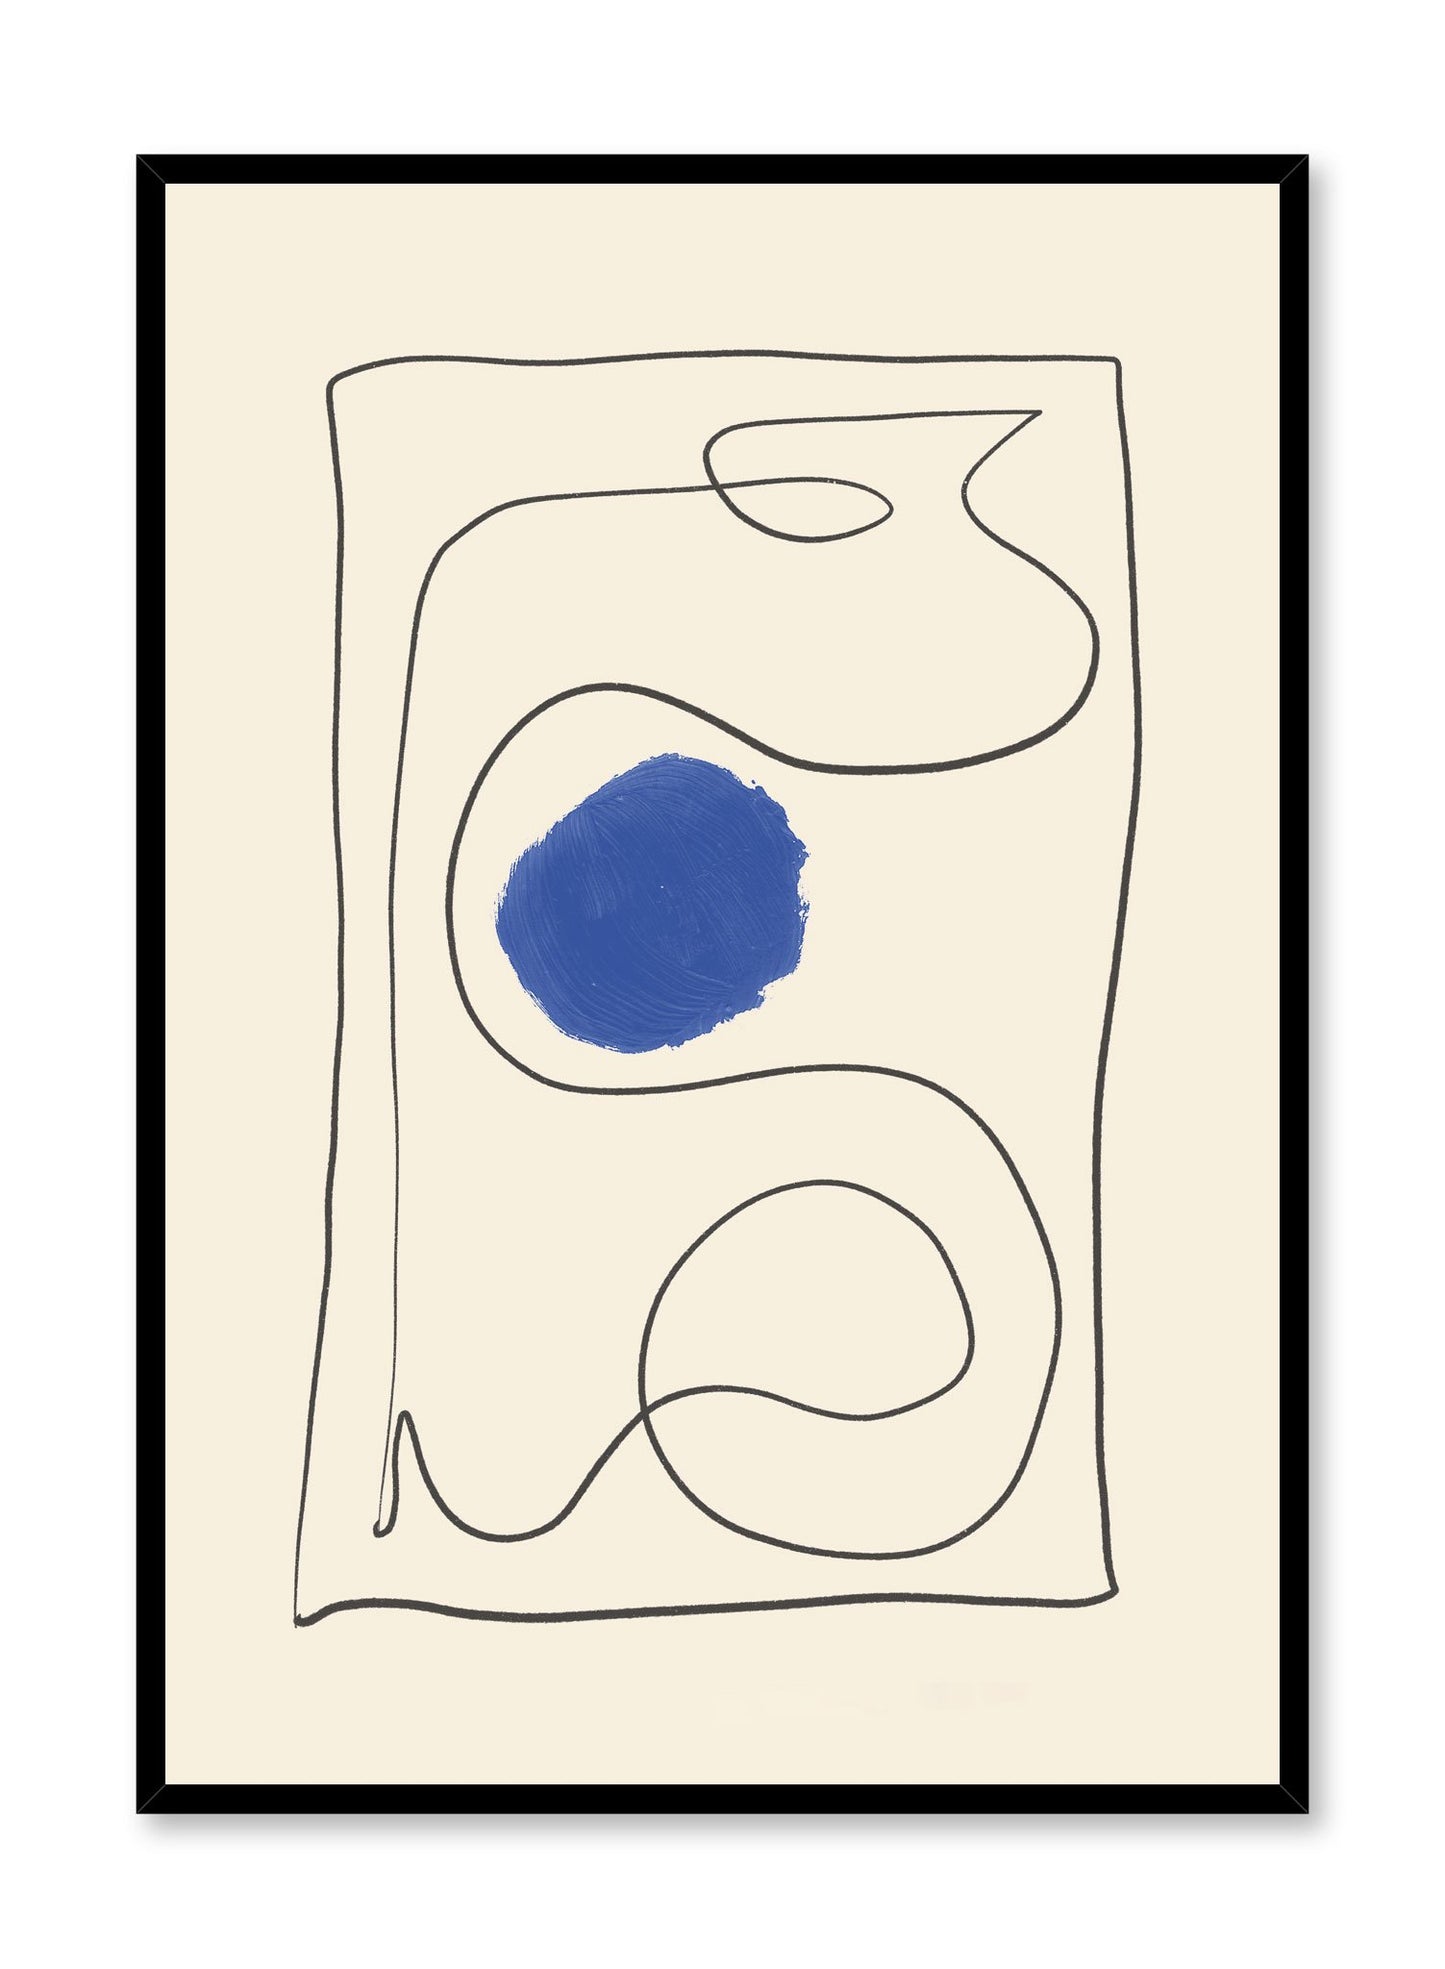 Modern minimalist poster by Opposite Wall with abstract design of Snakes and Ladders by Toffie Affichiste